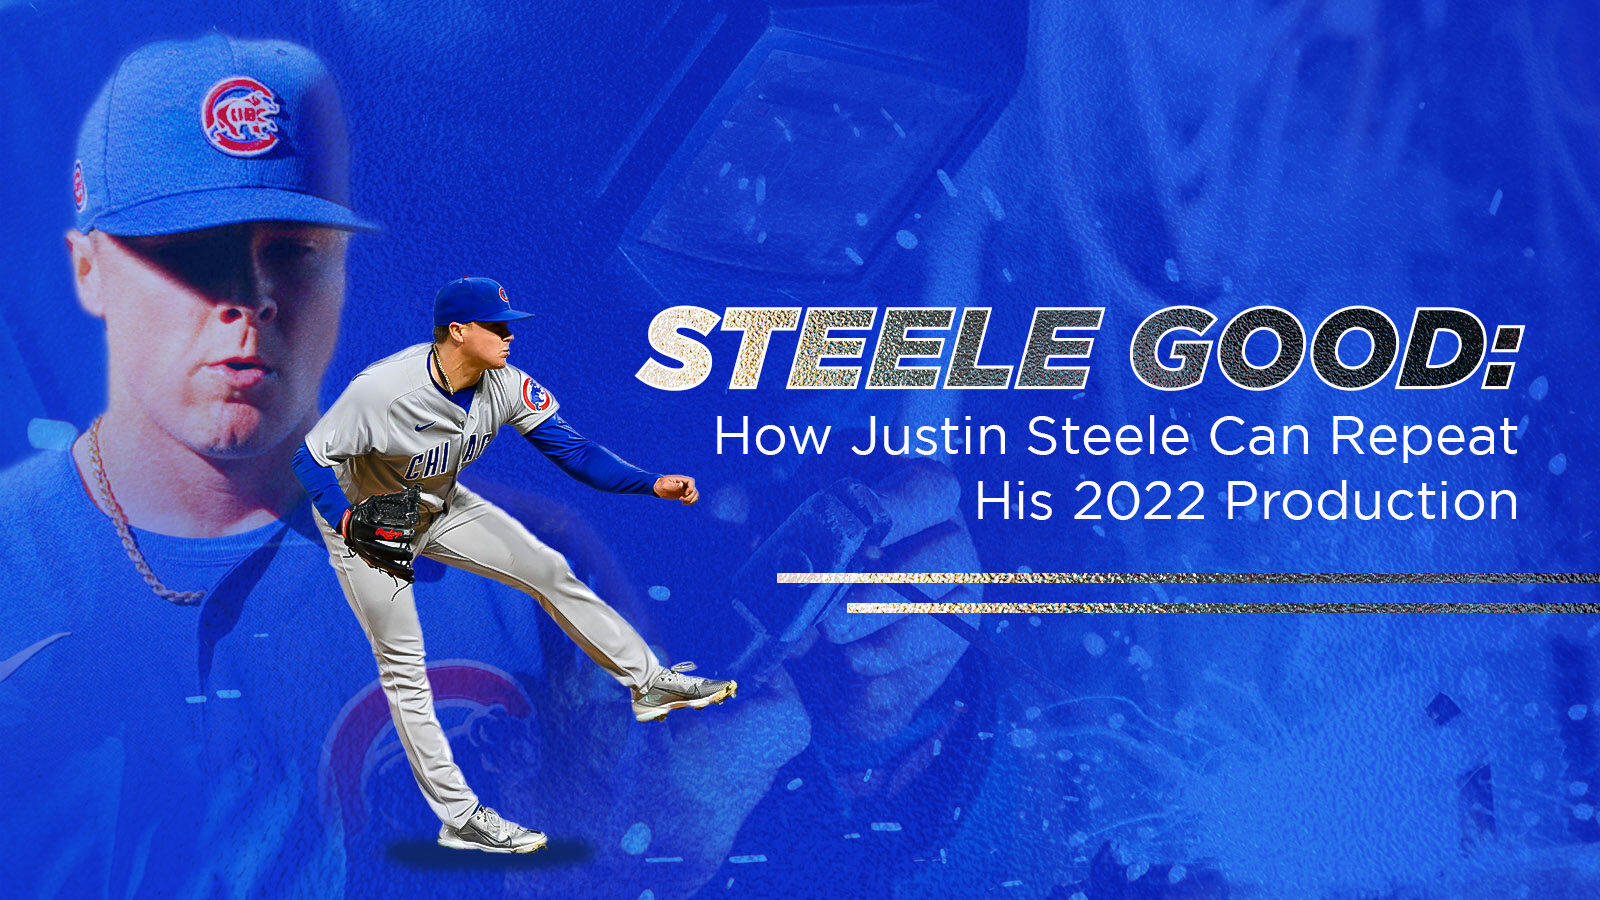 Steele Good: How Justin Steele Can Repeat His 2022 Production